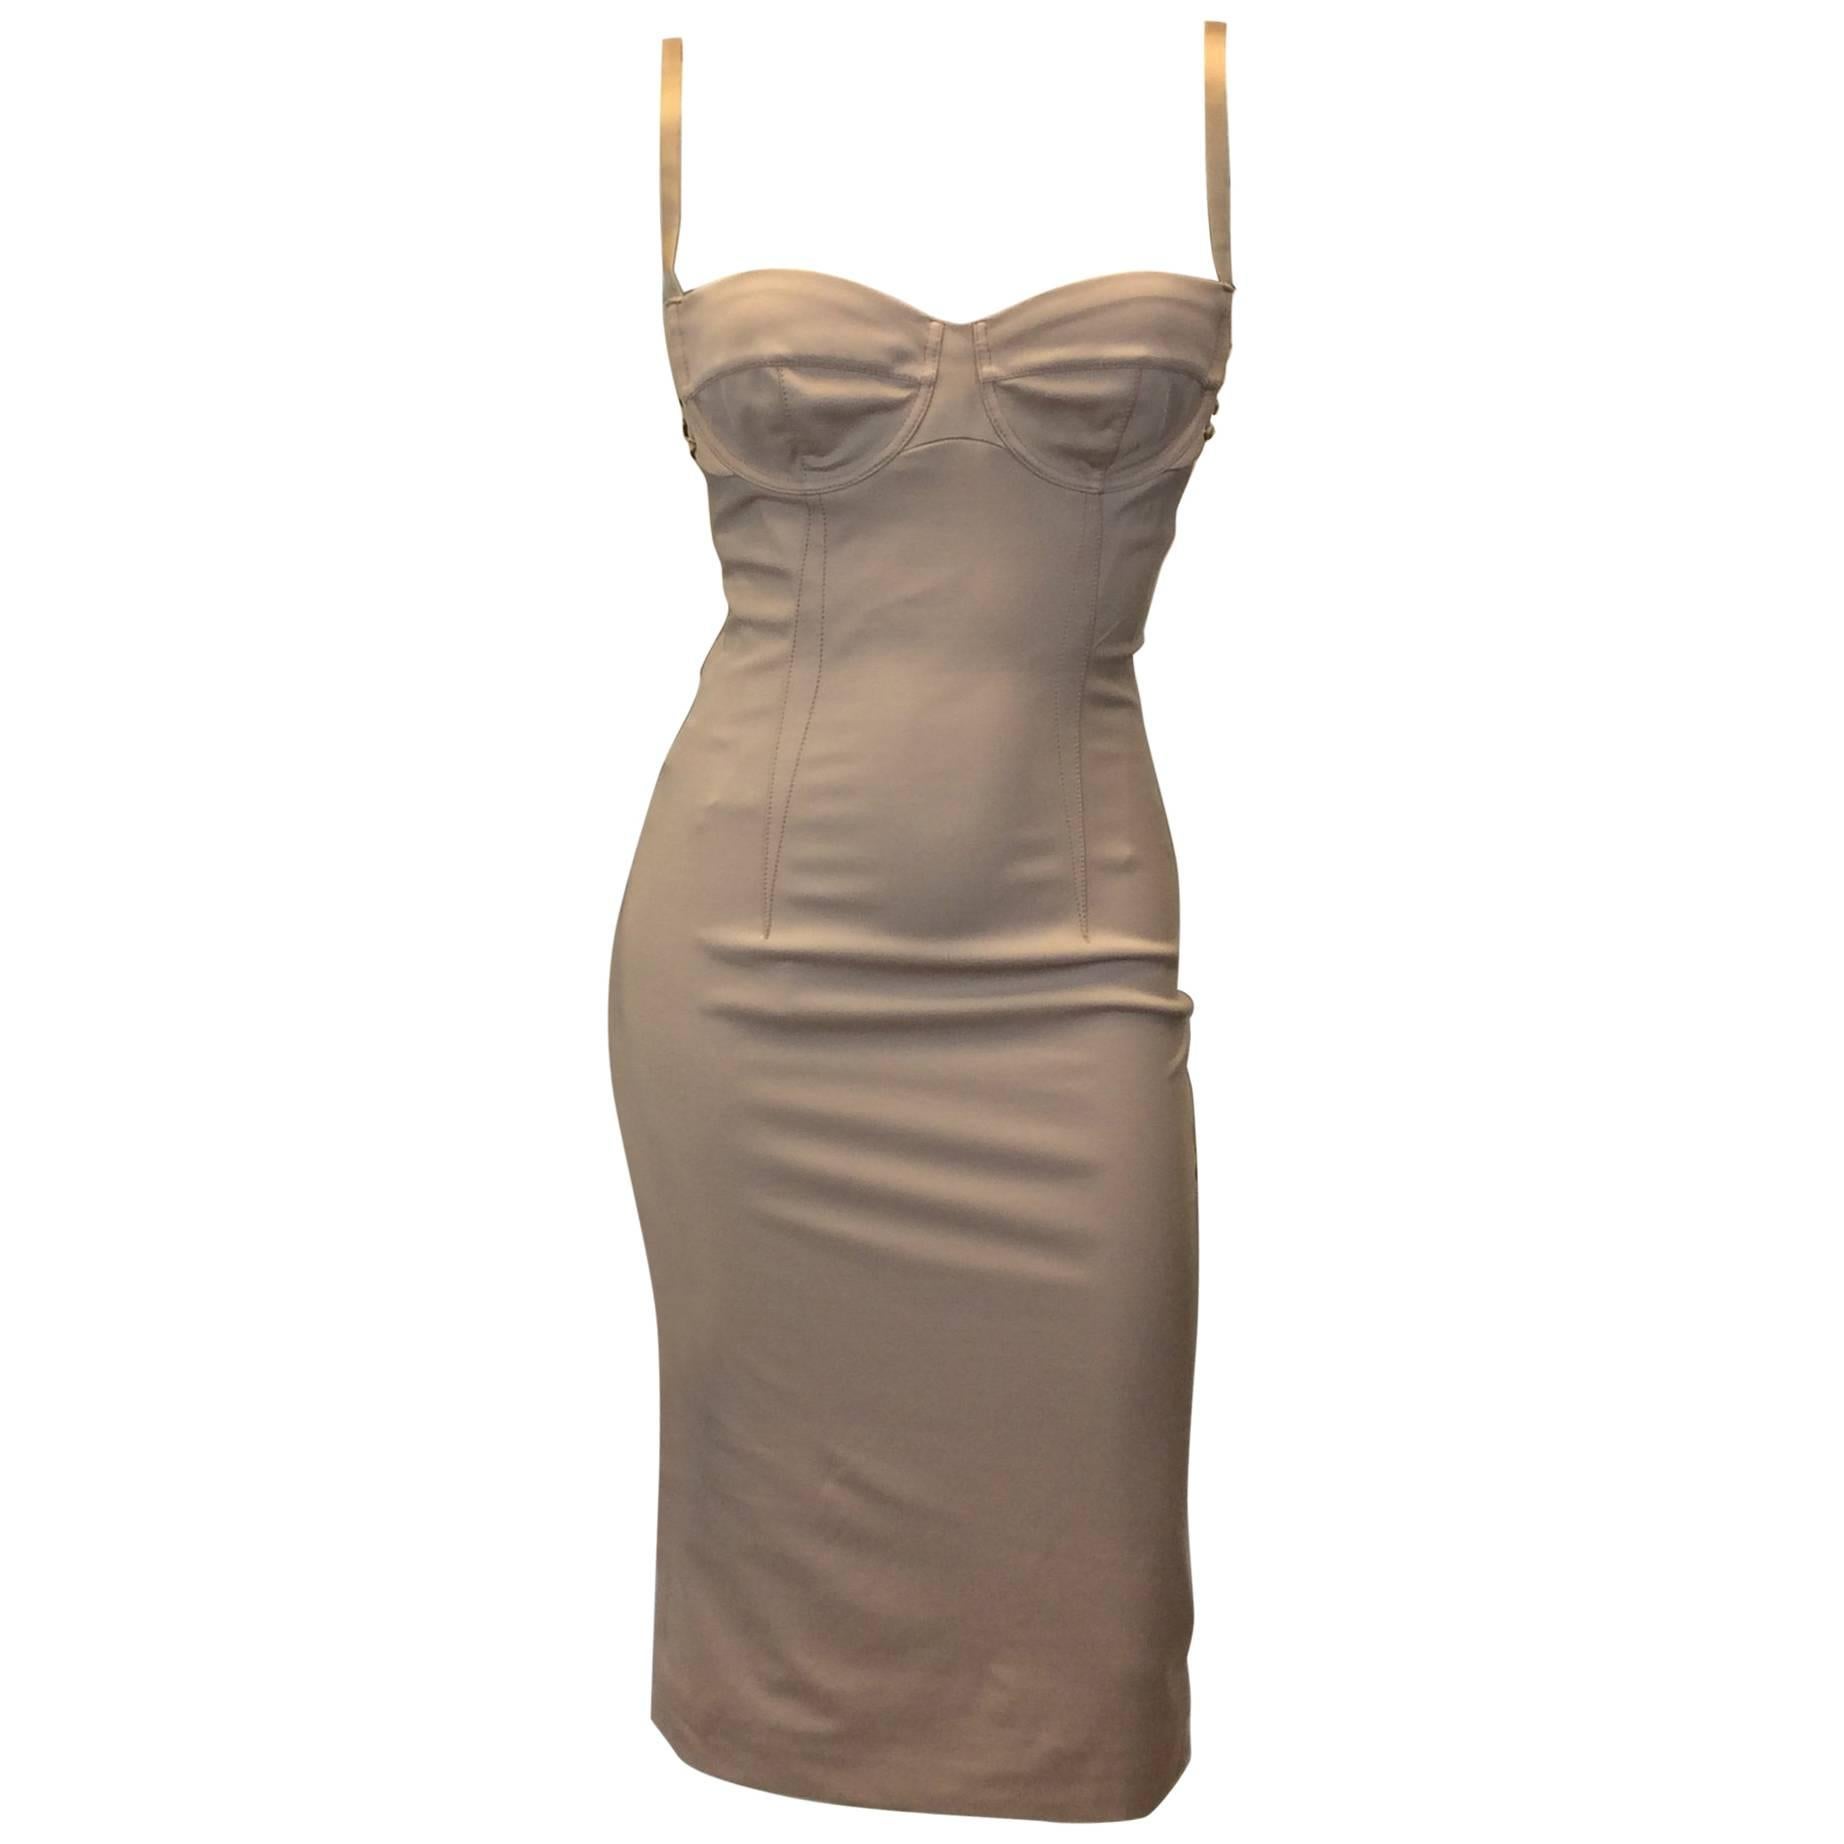 Dolce & Gabbana Nude Bustier Dress with Strappy Back Detail For Sale